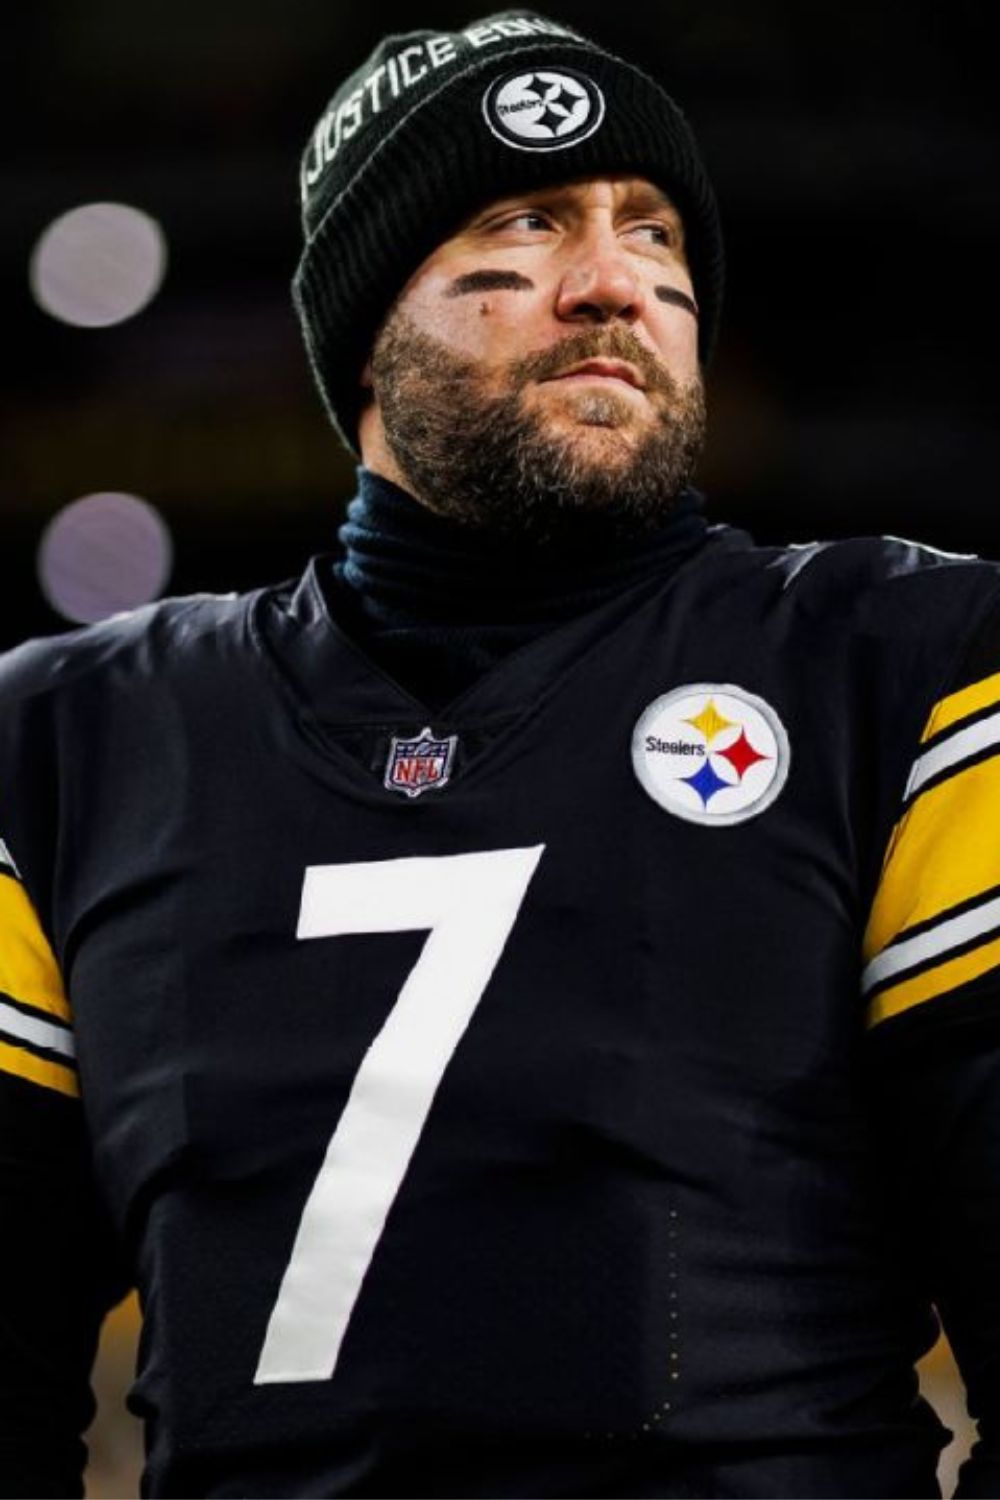 Ben Roethlisberger On The Field (Source The Athletic)